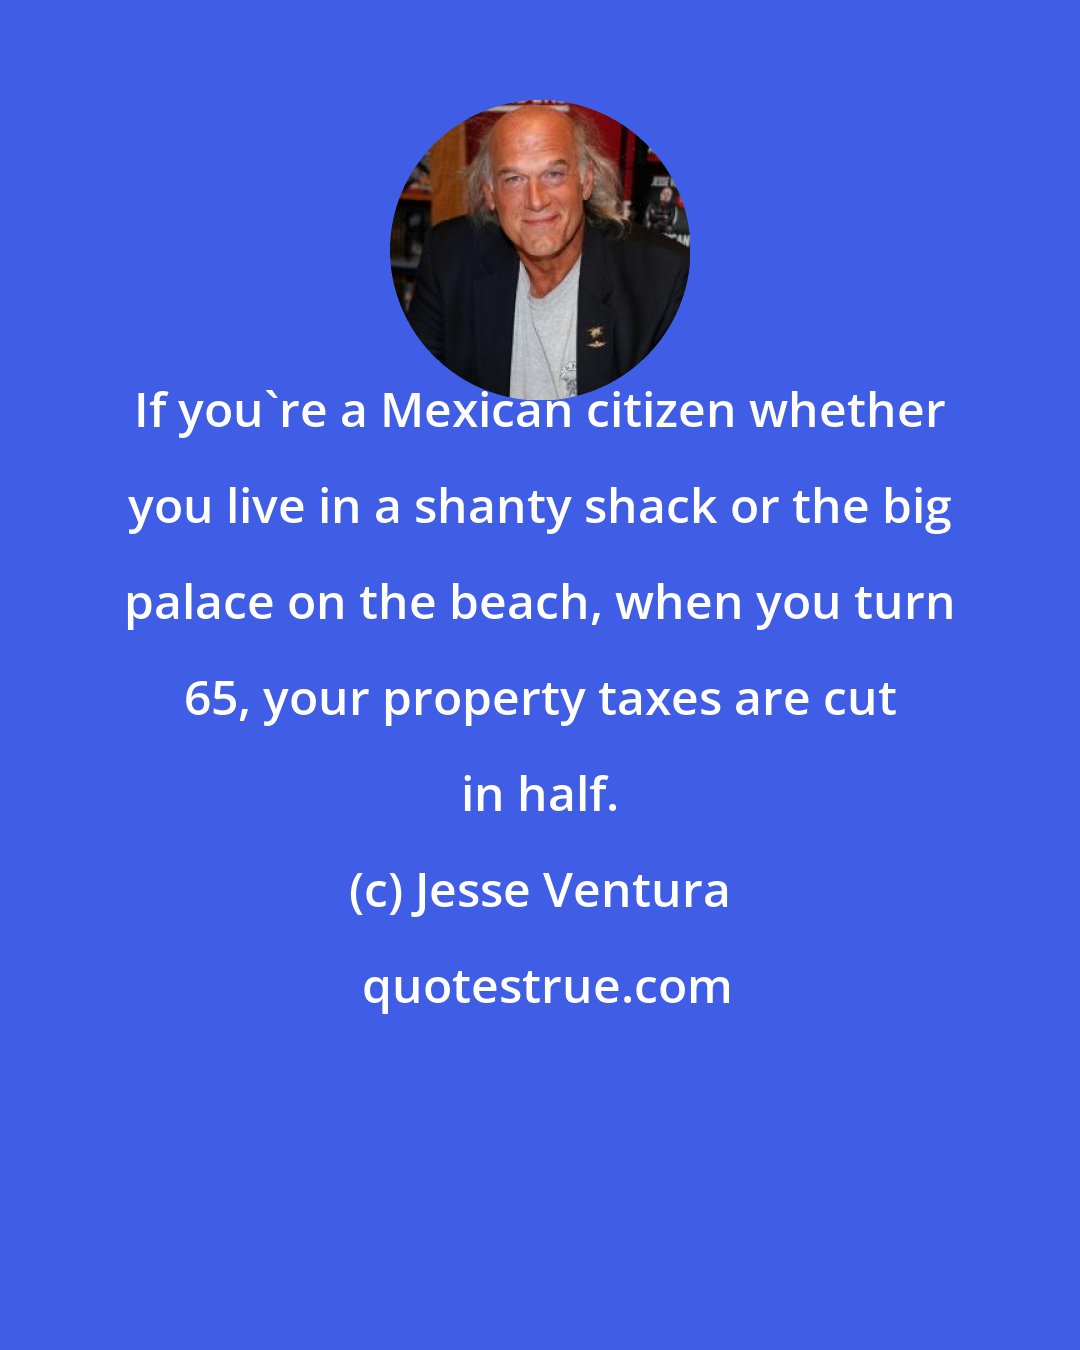 Jesse Ventura: If you're a Mexican citizen whether you live in a shanty shack or the big palace on the beach, when you turn 65, your property taxes are cut in half.